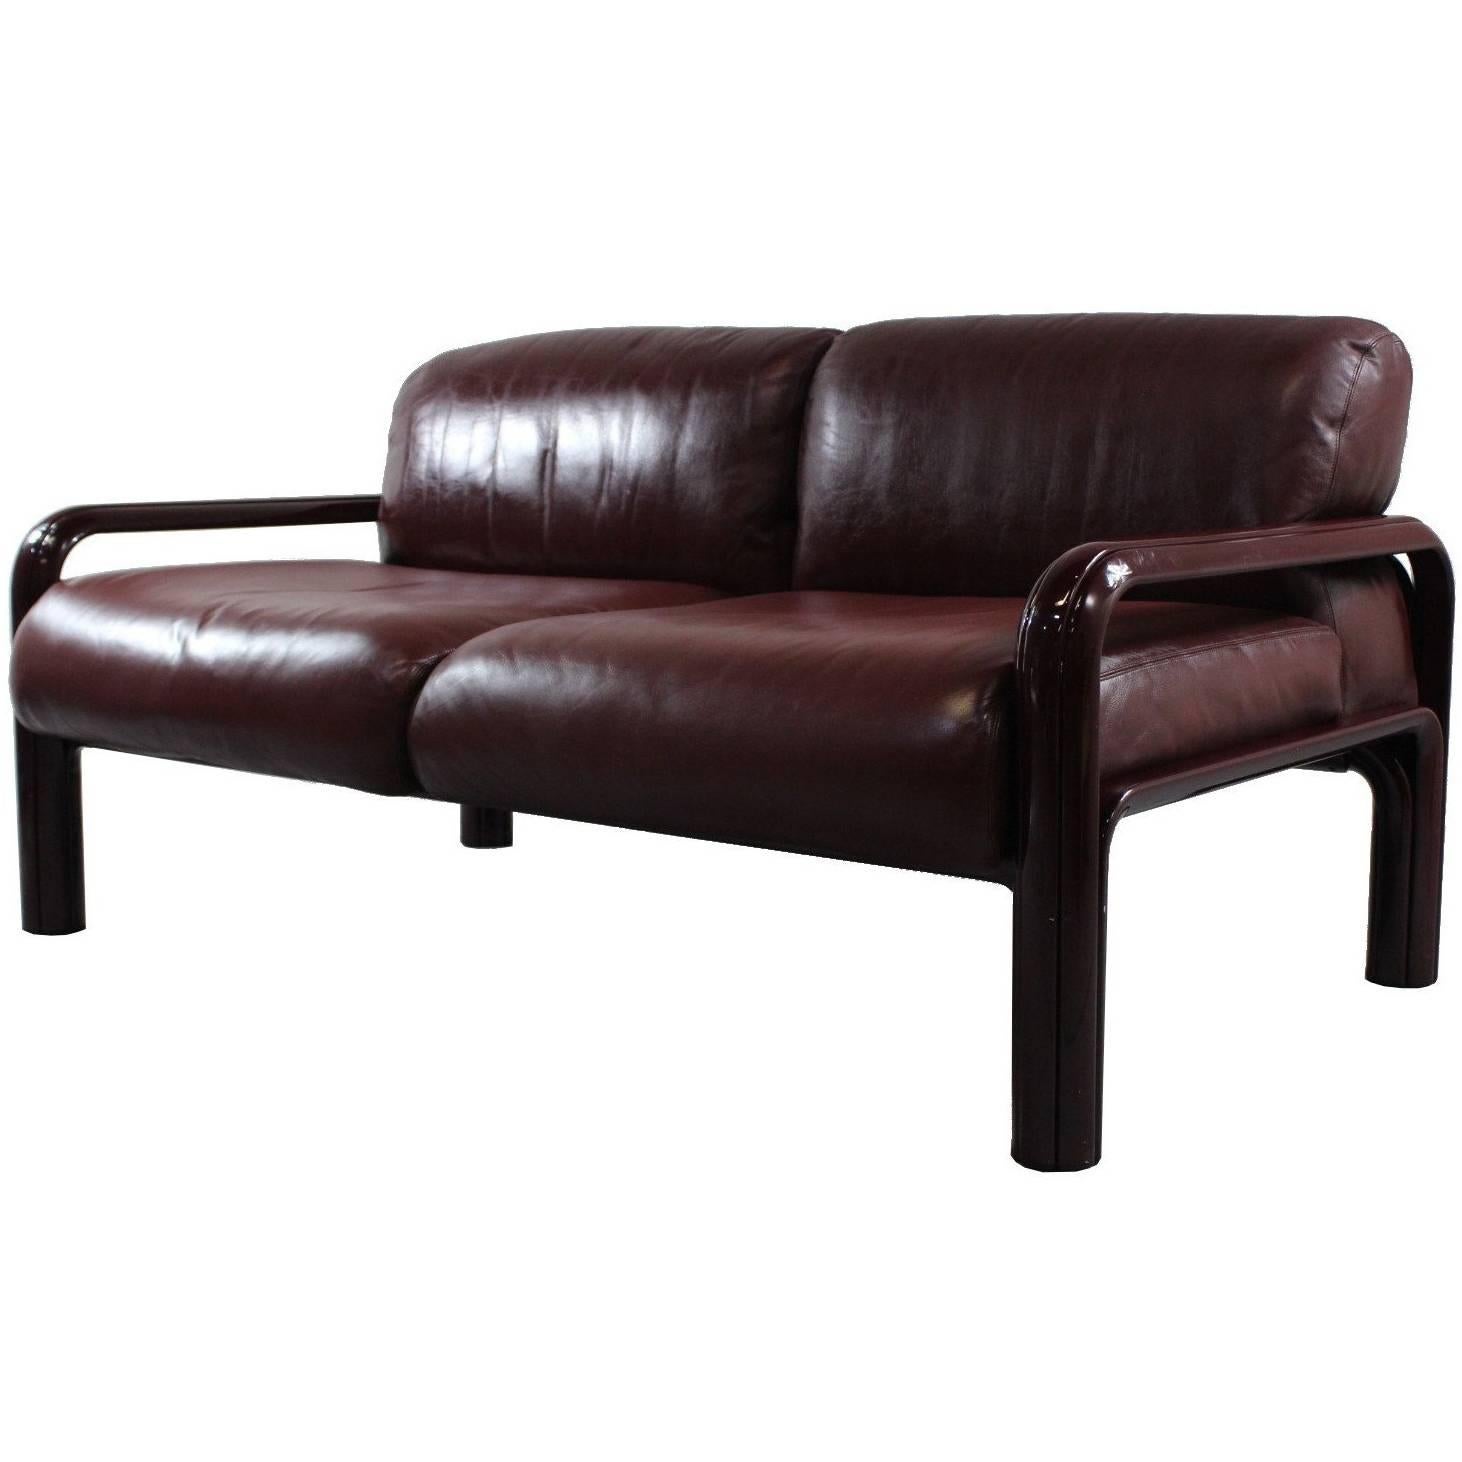 1970s Gae Aulenti Two-Seat Leather Sofa for Knoll For Sale